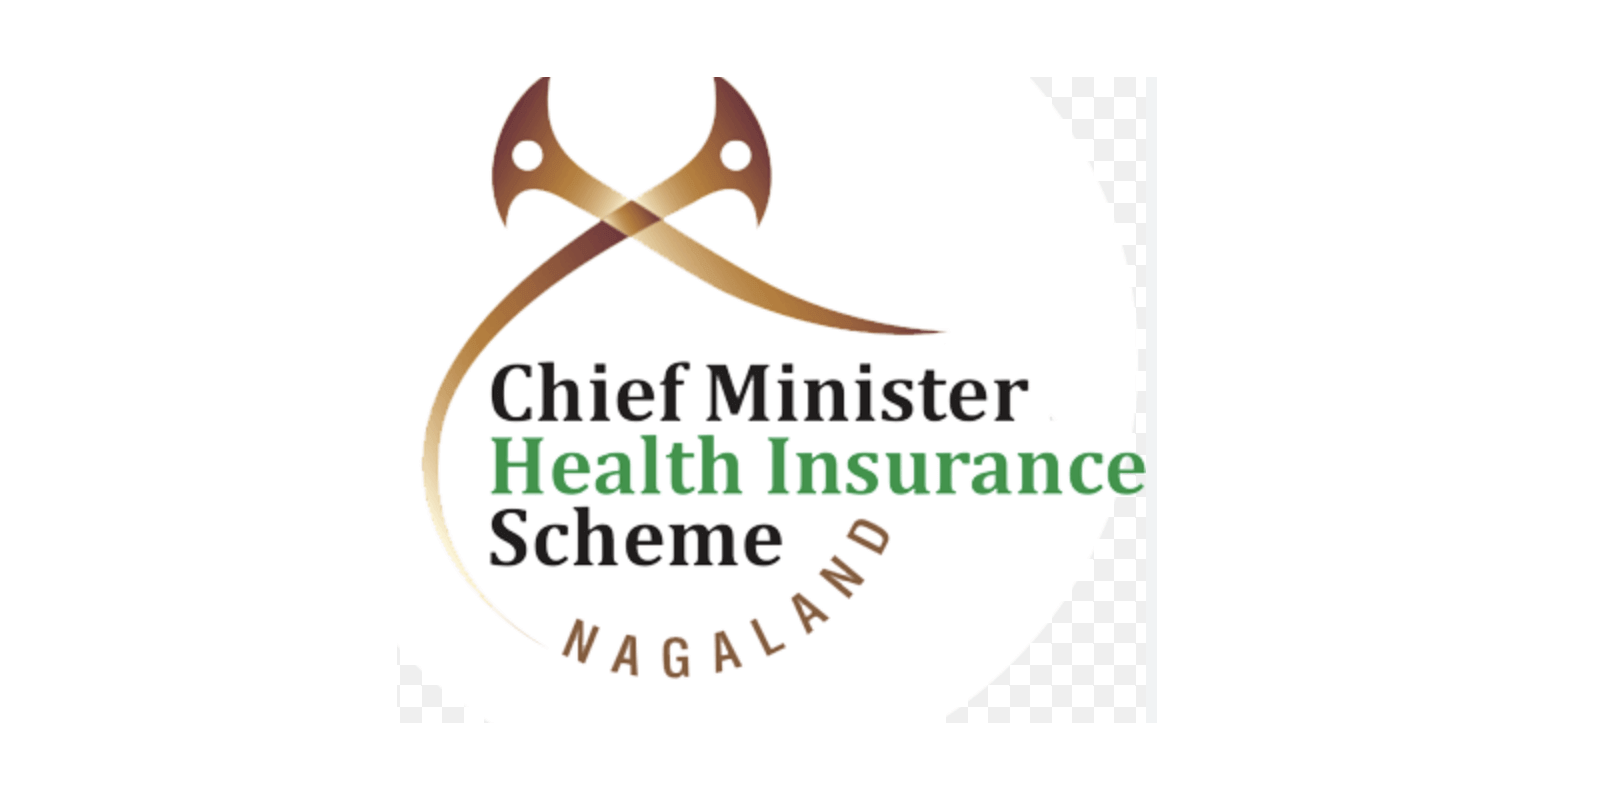 CMHIS ( Chief Minister Health Insurance Scheme Nagaland ) : Coverages, Steps to apply and How to Renew